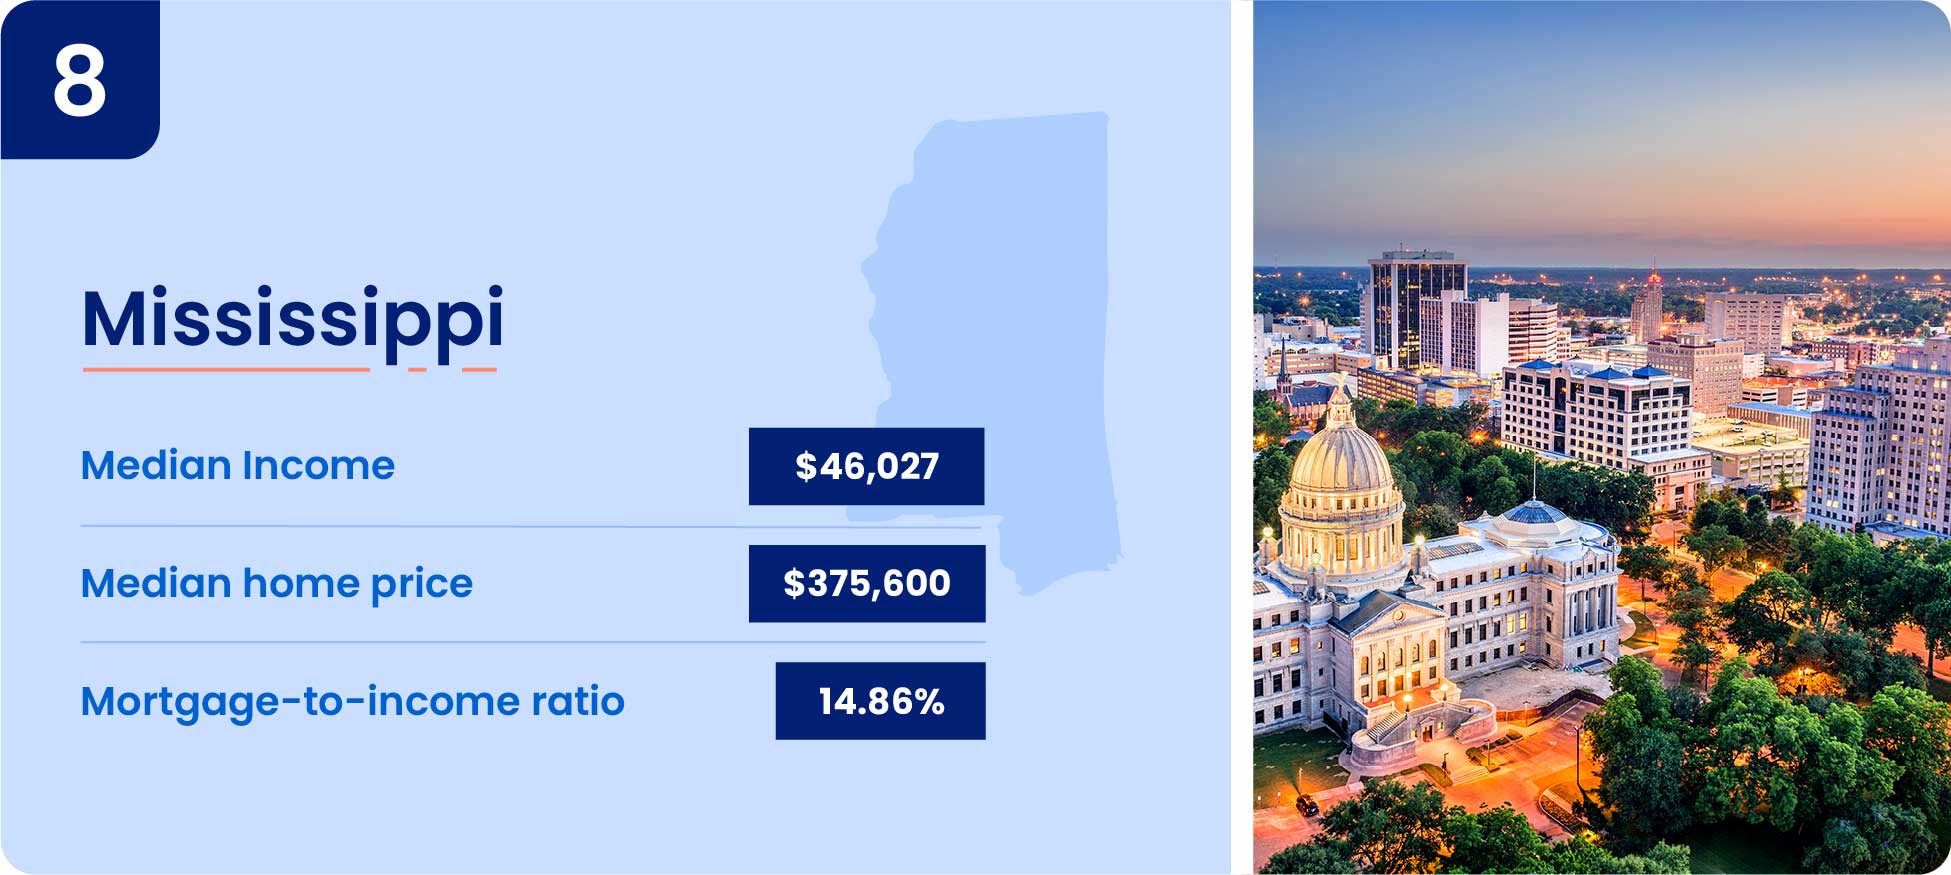 Image shows why one of the cheapest states to buy a house is Mississippi.